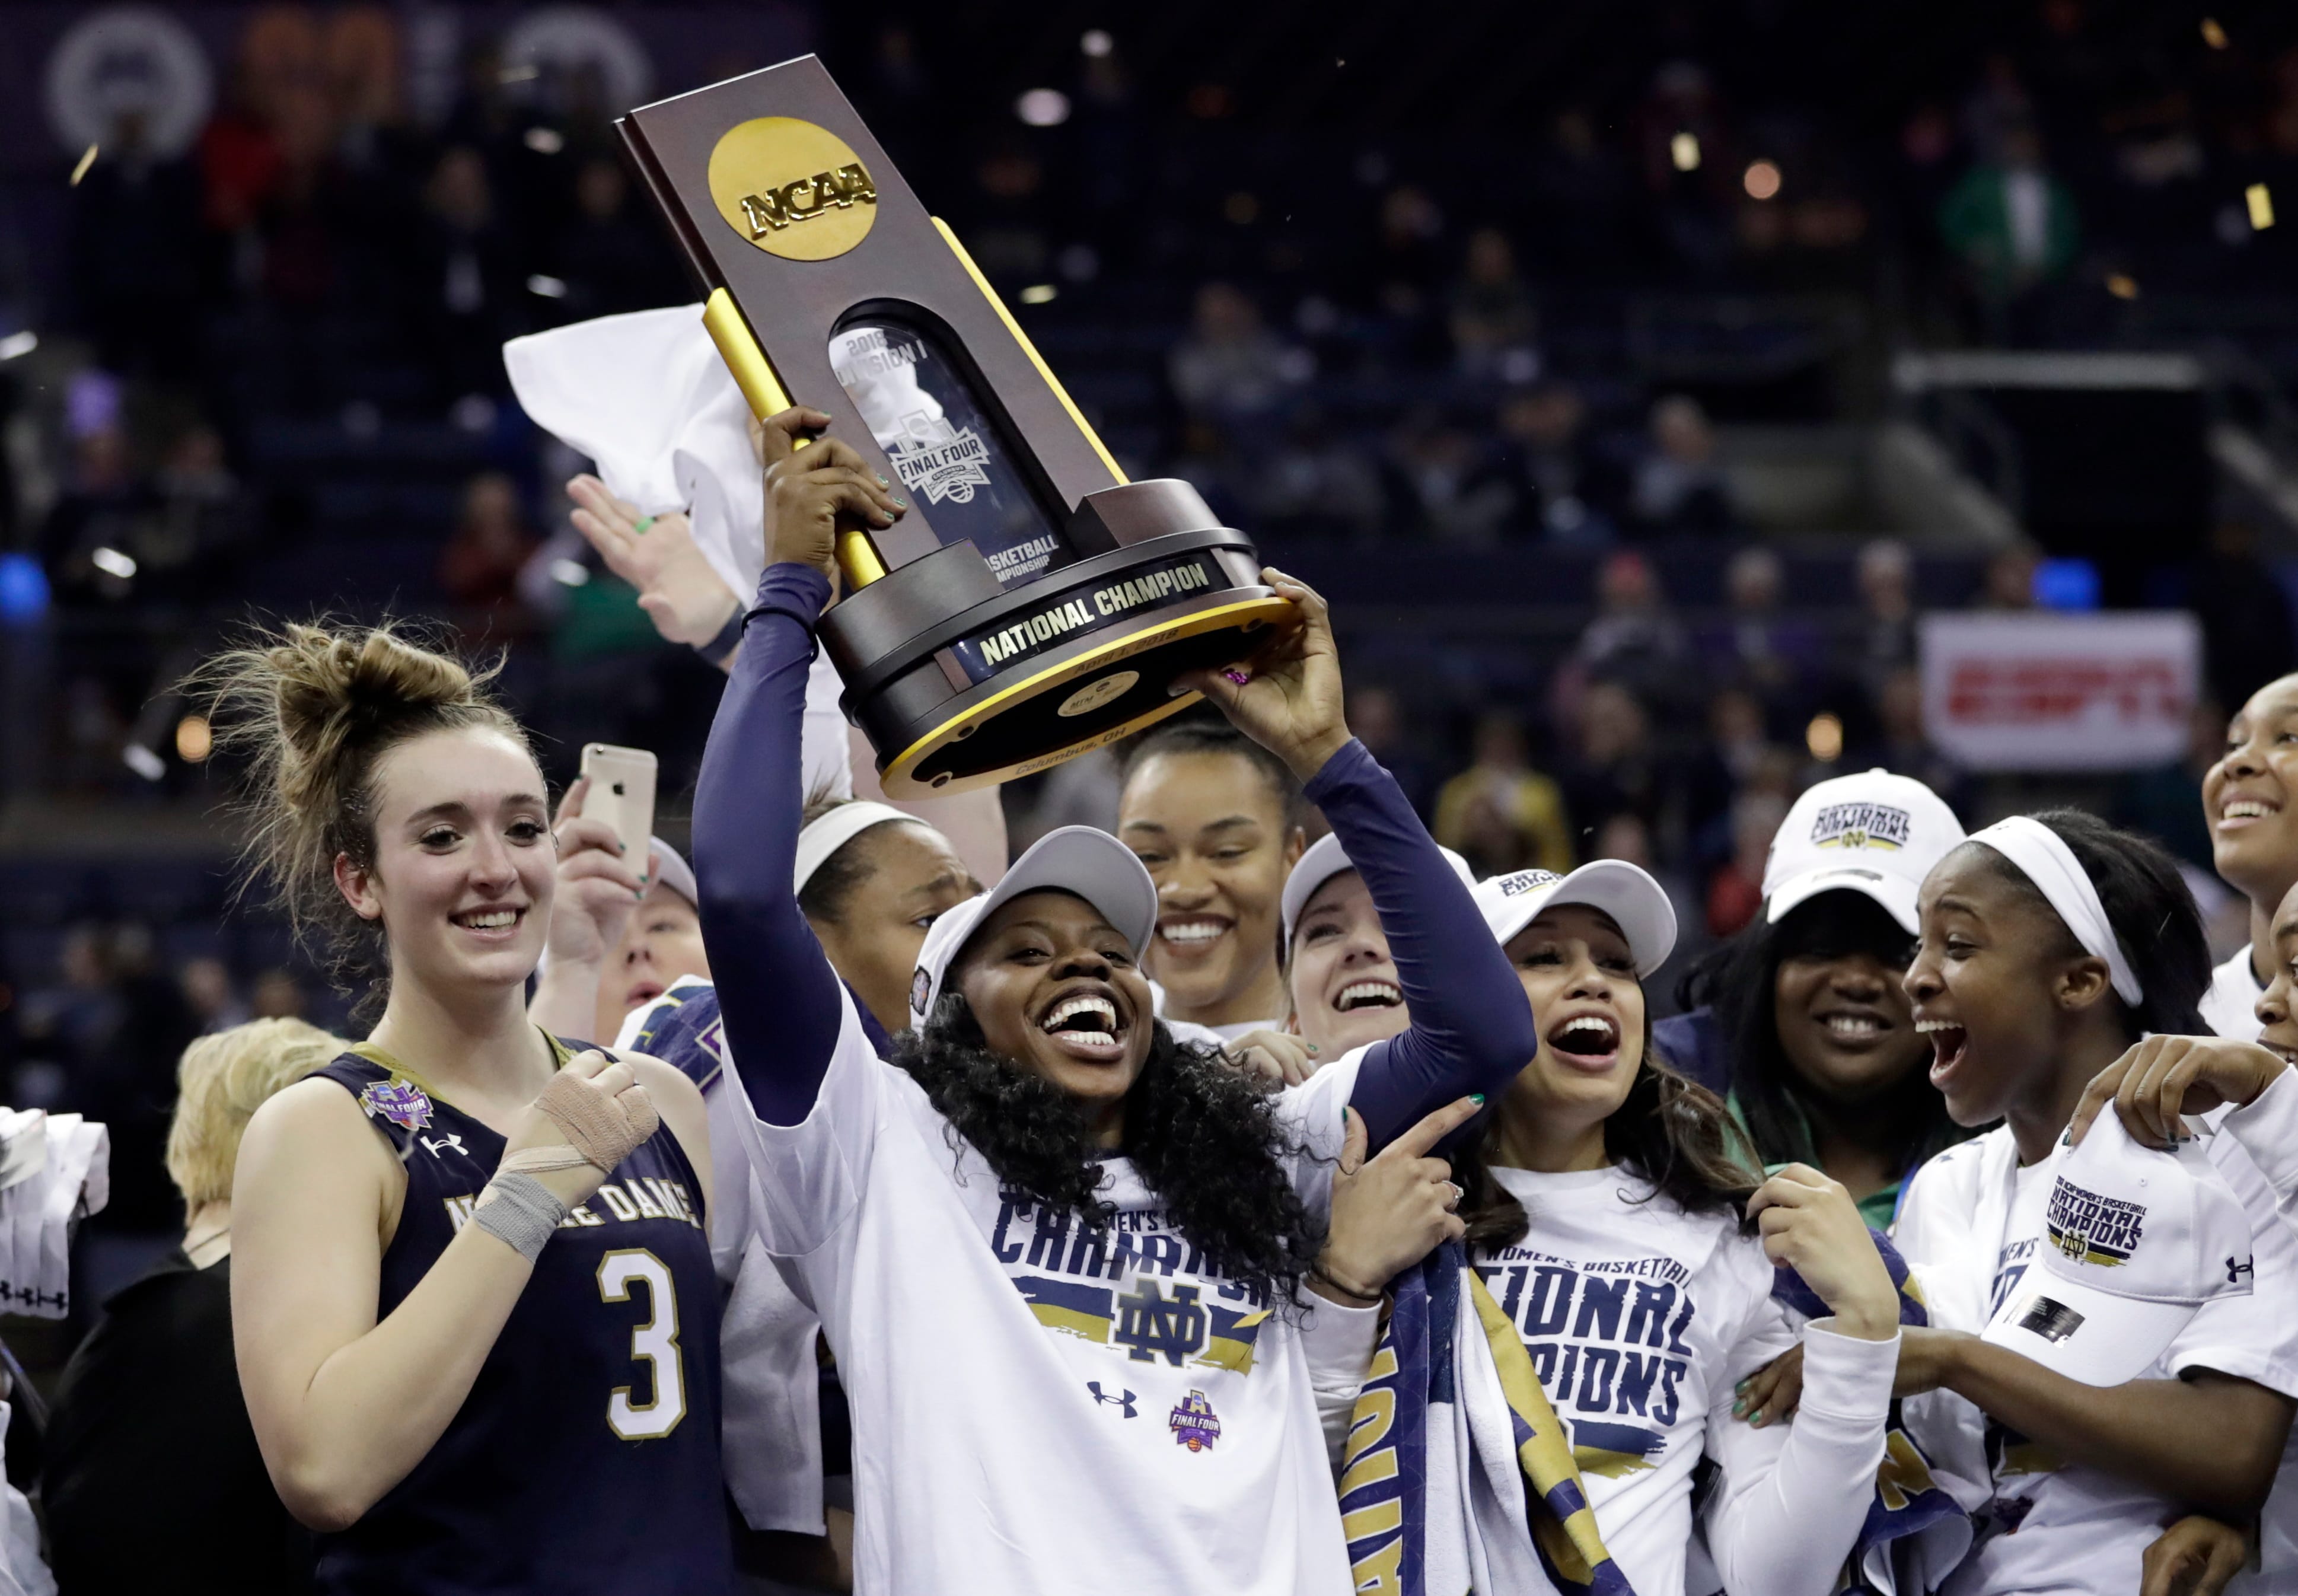 Notre Dame's Arike Ogunbowale holds the trophy after defeating Mississippi State in the final of the women's NCAA Final Four college basketball tournament, Sunday, April 1, 2018, in Columbus, Ohio. Notre Dame won 61-58.